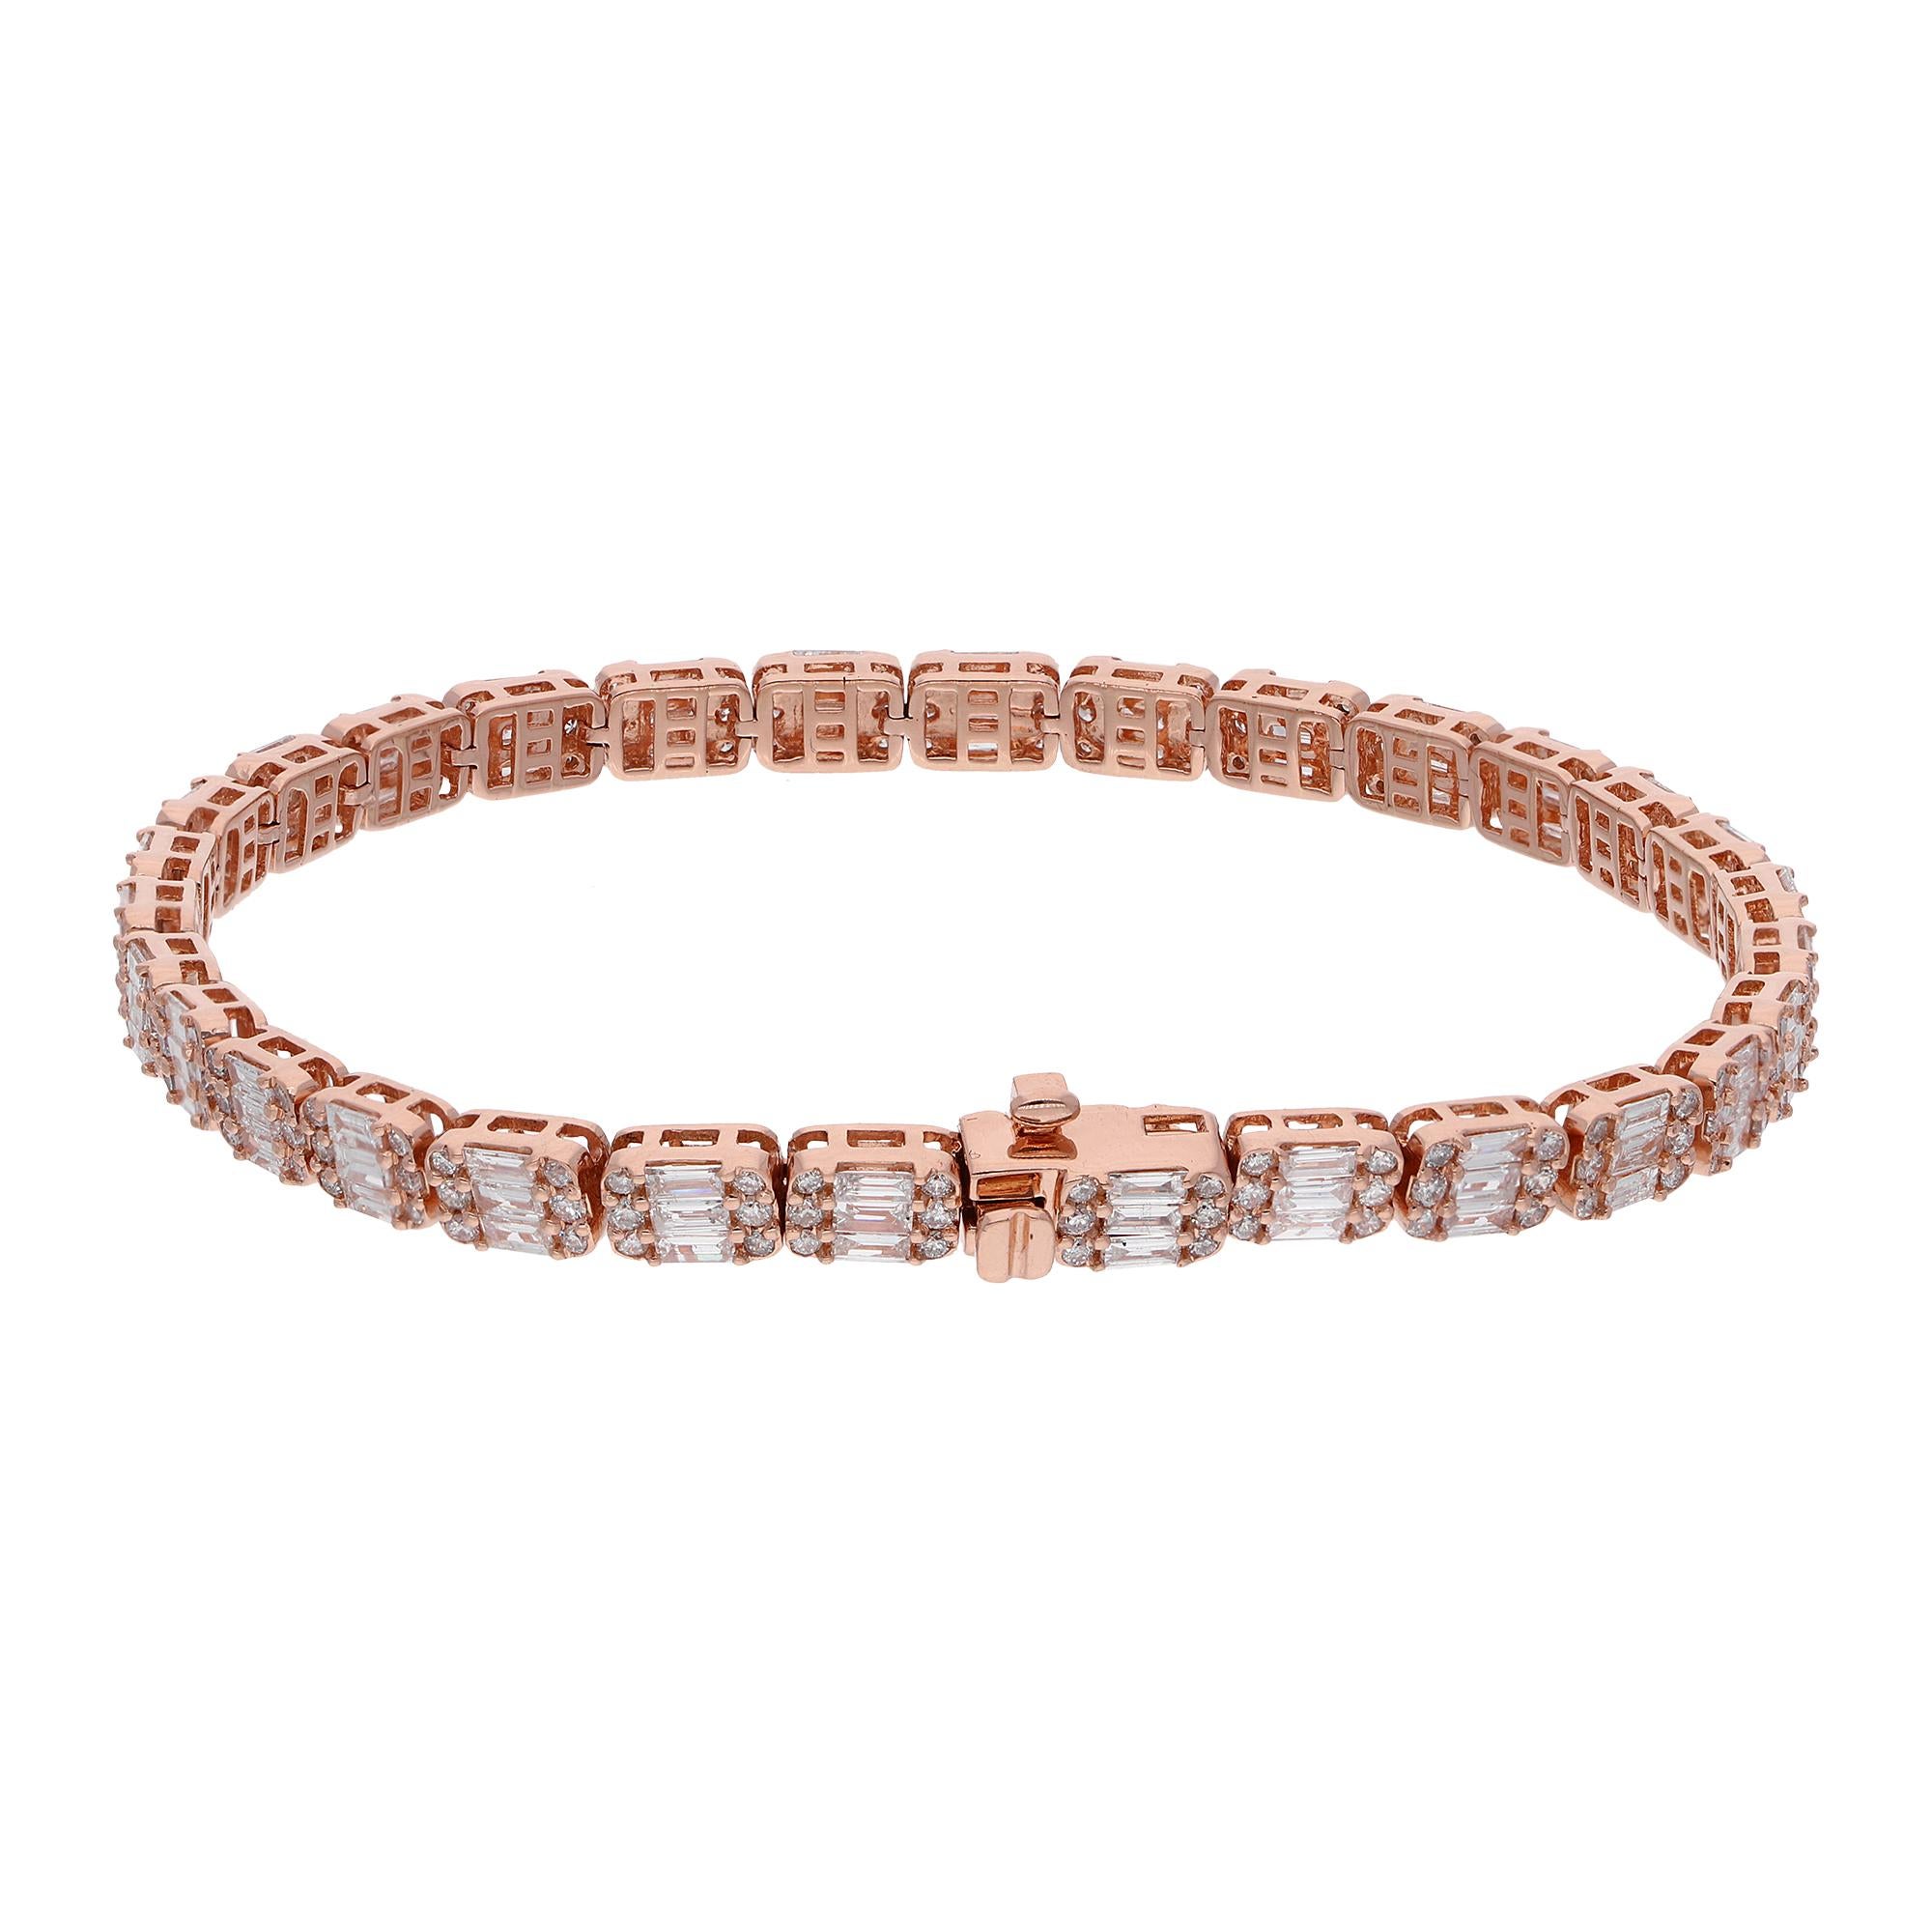 Item Code :- SEBR-42226A (14K)
Gross Wt. :- 14.04 gm
14k Rose Gold Wt. :- 12.86 gm
Diamond Wt. :- 5.90 Ct. ( AVERAGE DIAMOND CLARITY SI1-SI2 & COLOR H-I )
Bracelet Length :- 7 Inches Long

✦ Sizing
.....................
We can adjust most items to